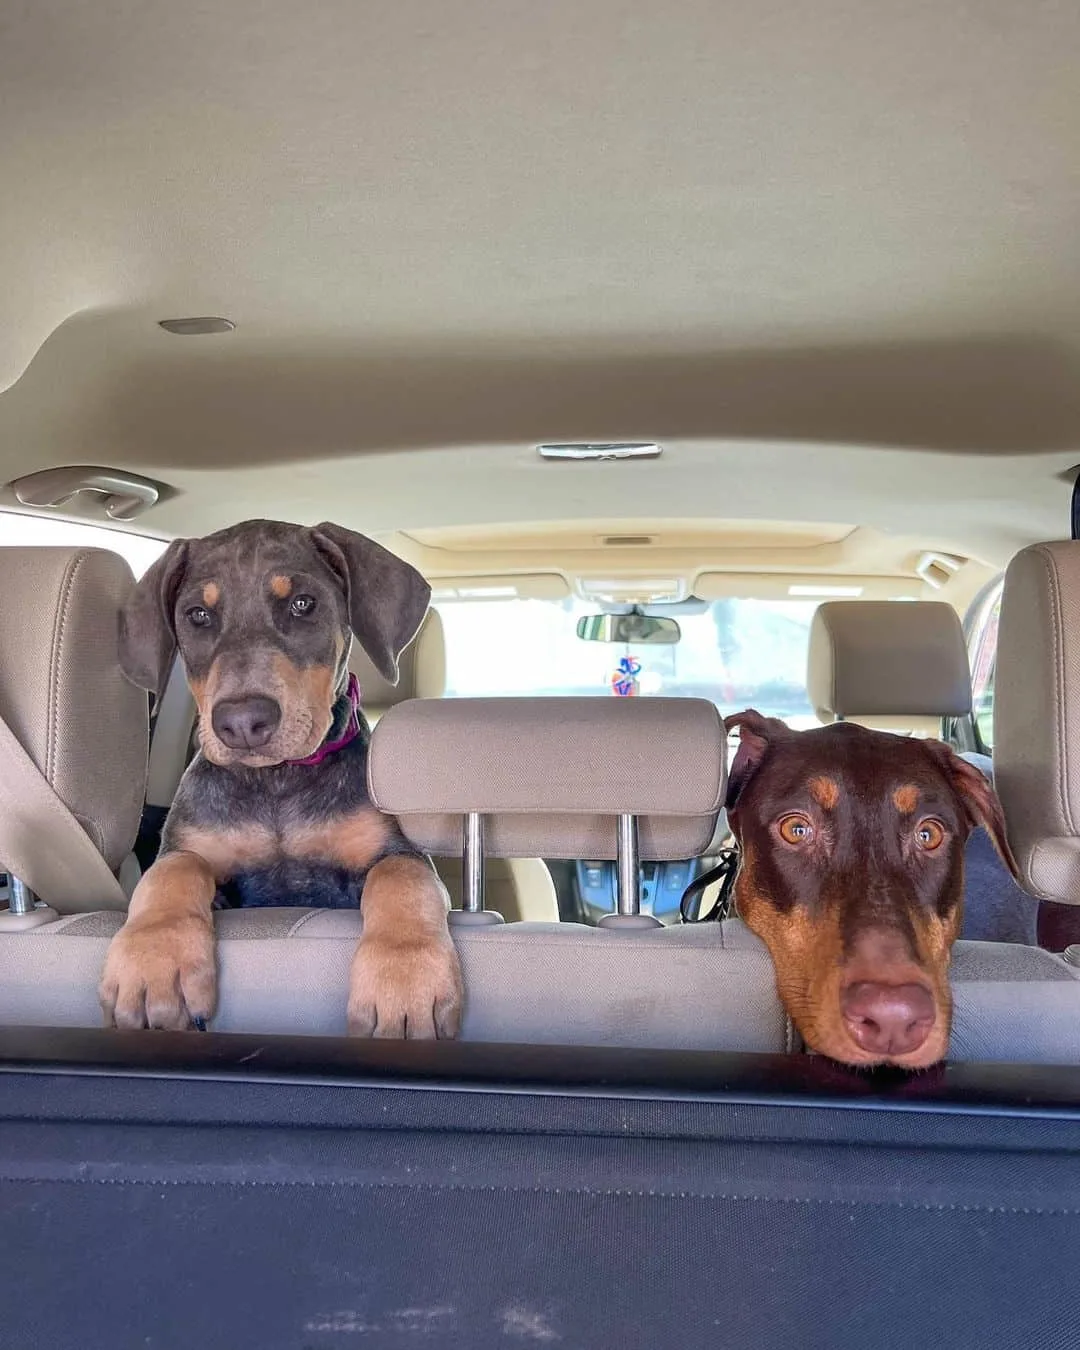 blue doberman puppy and chocolate doberman in the backseat of the car